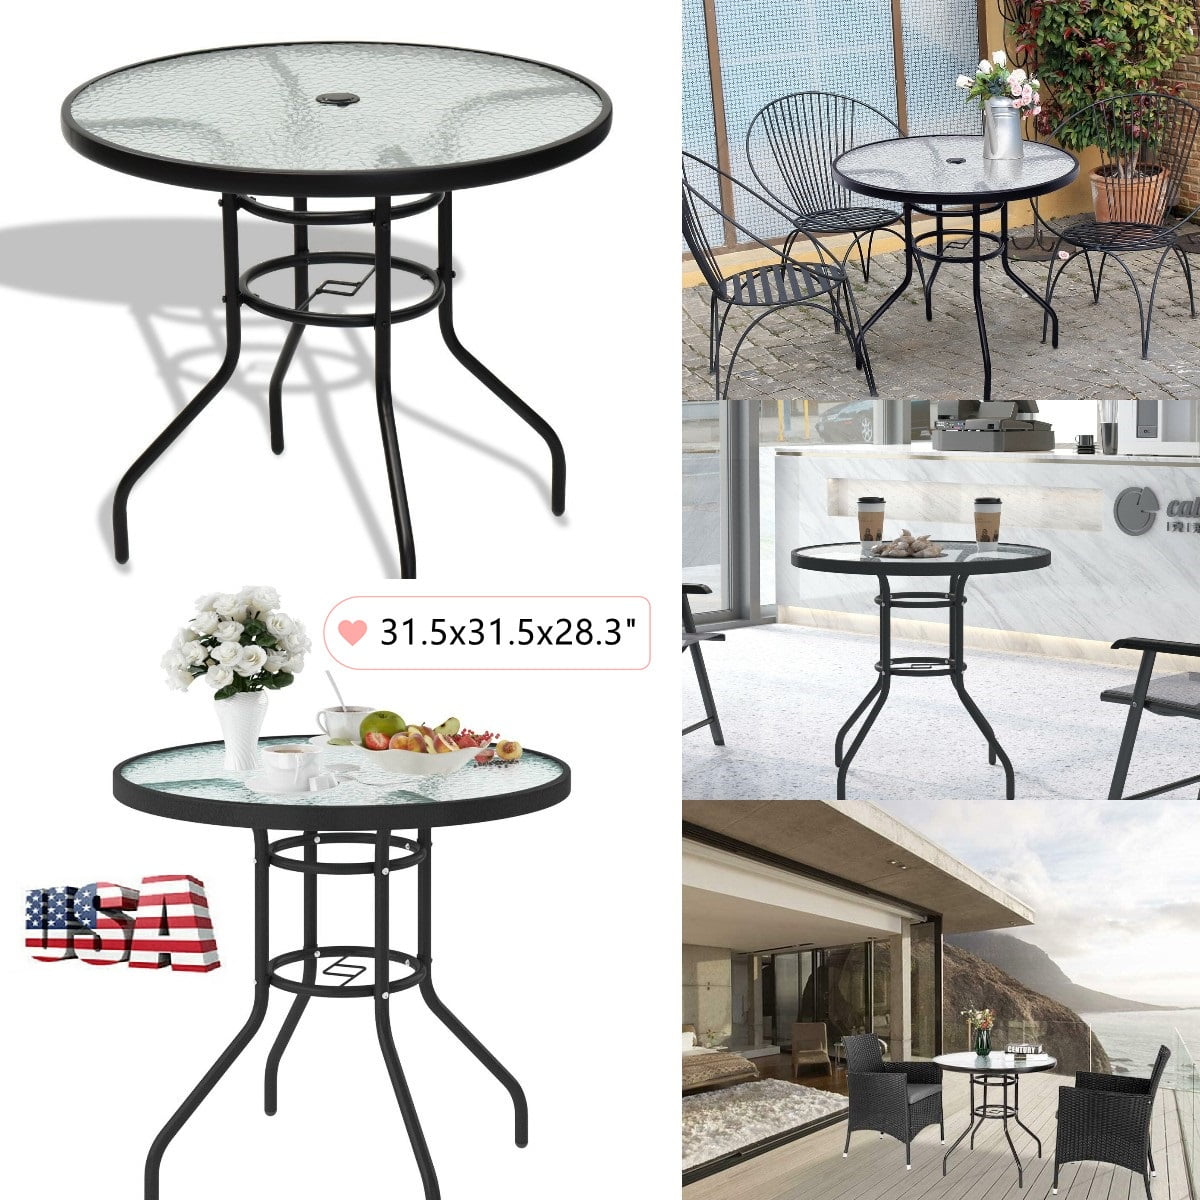 Garden Patio Table Chairs Set Outdoor Furniture Glass Parasol Hole Dining Bistro 